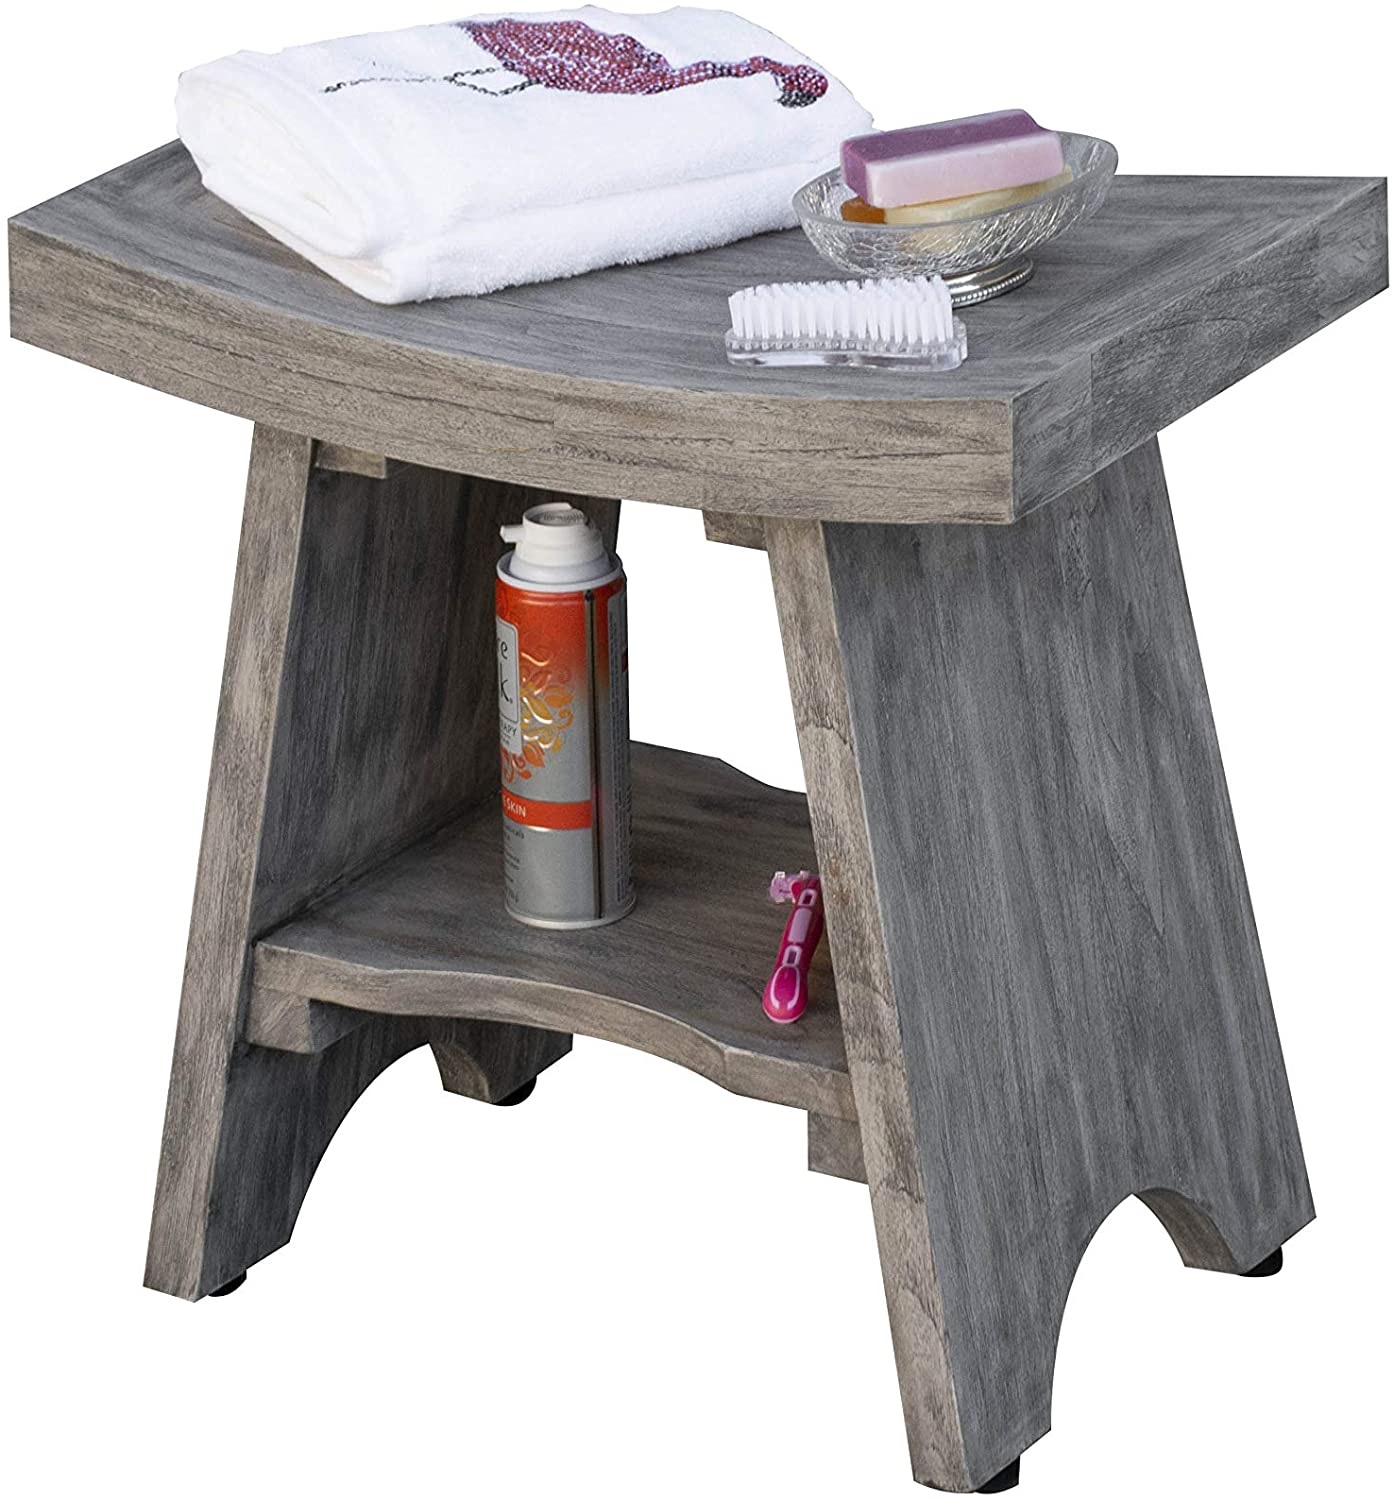 Contemporary Teak Shower or Bench with Shelf in Gray Finish